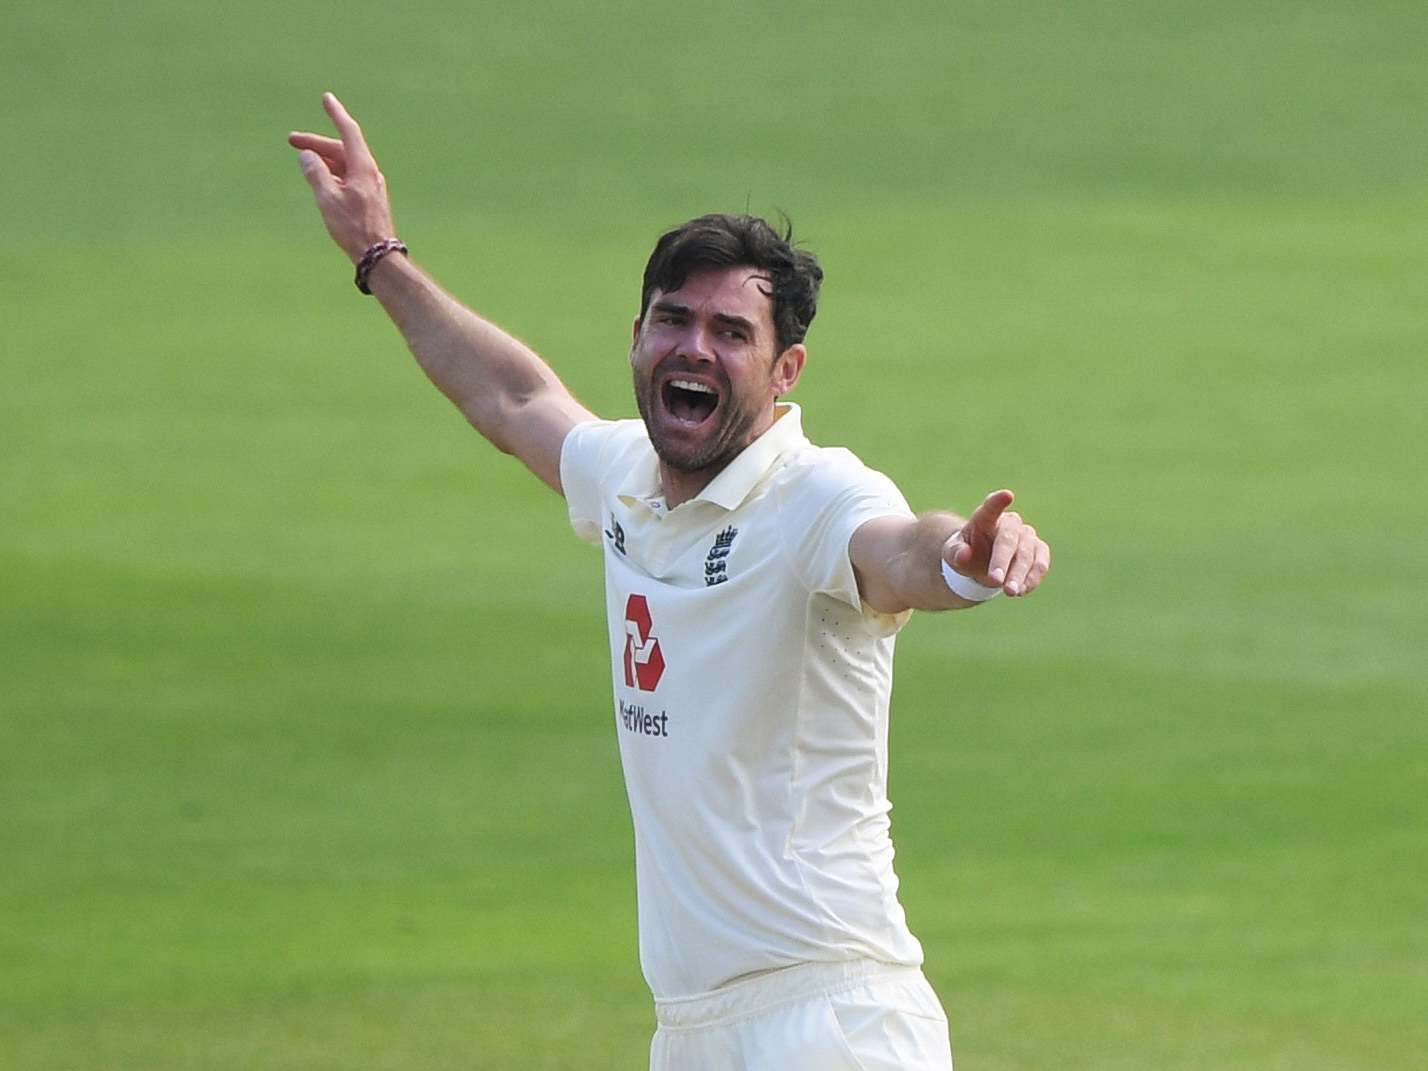 England quick Sam Curran shocked by talk of James Anderson's fading powers